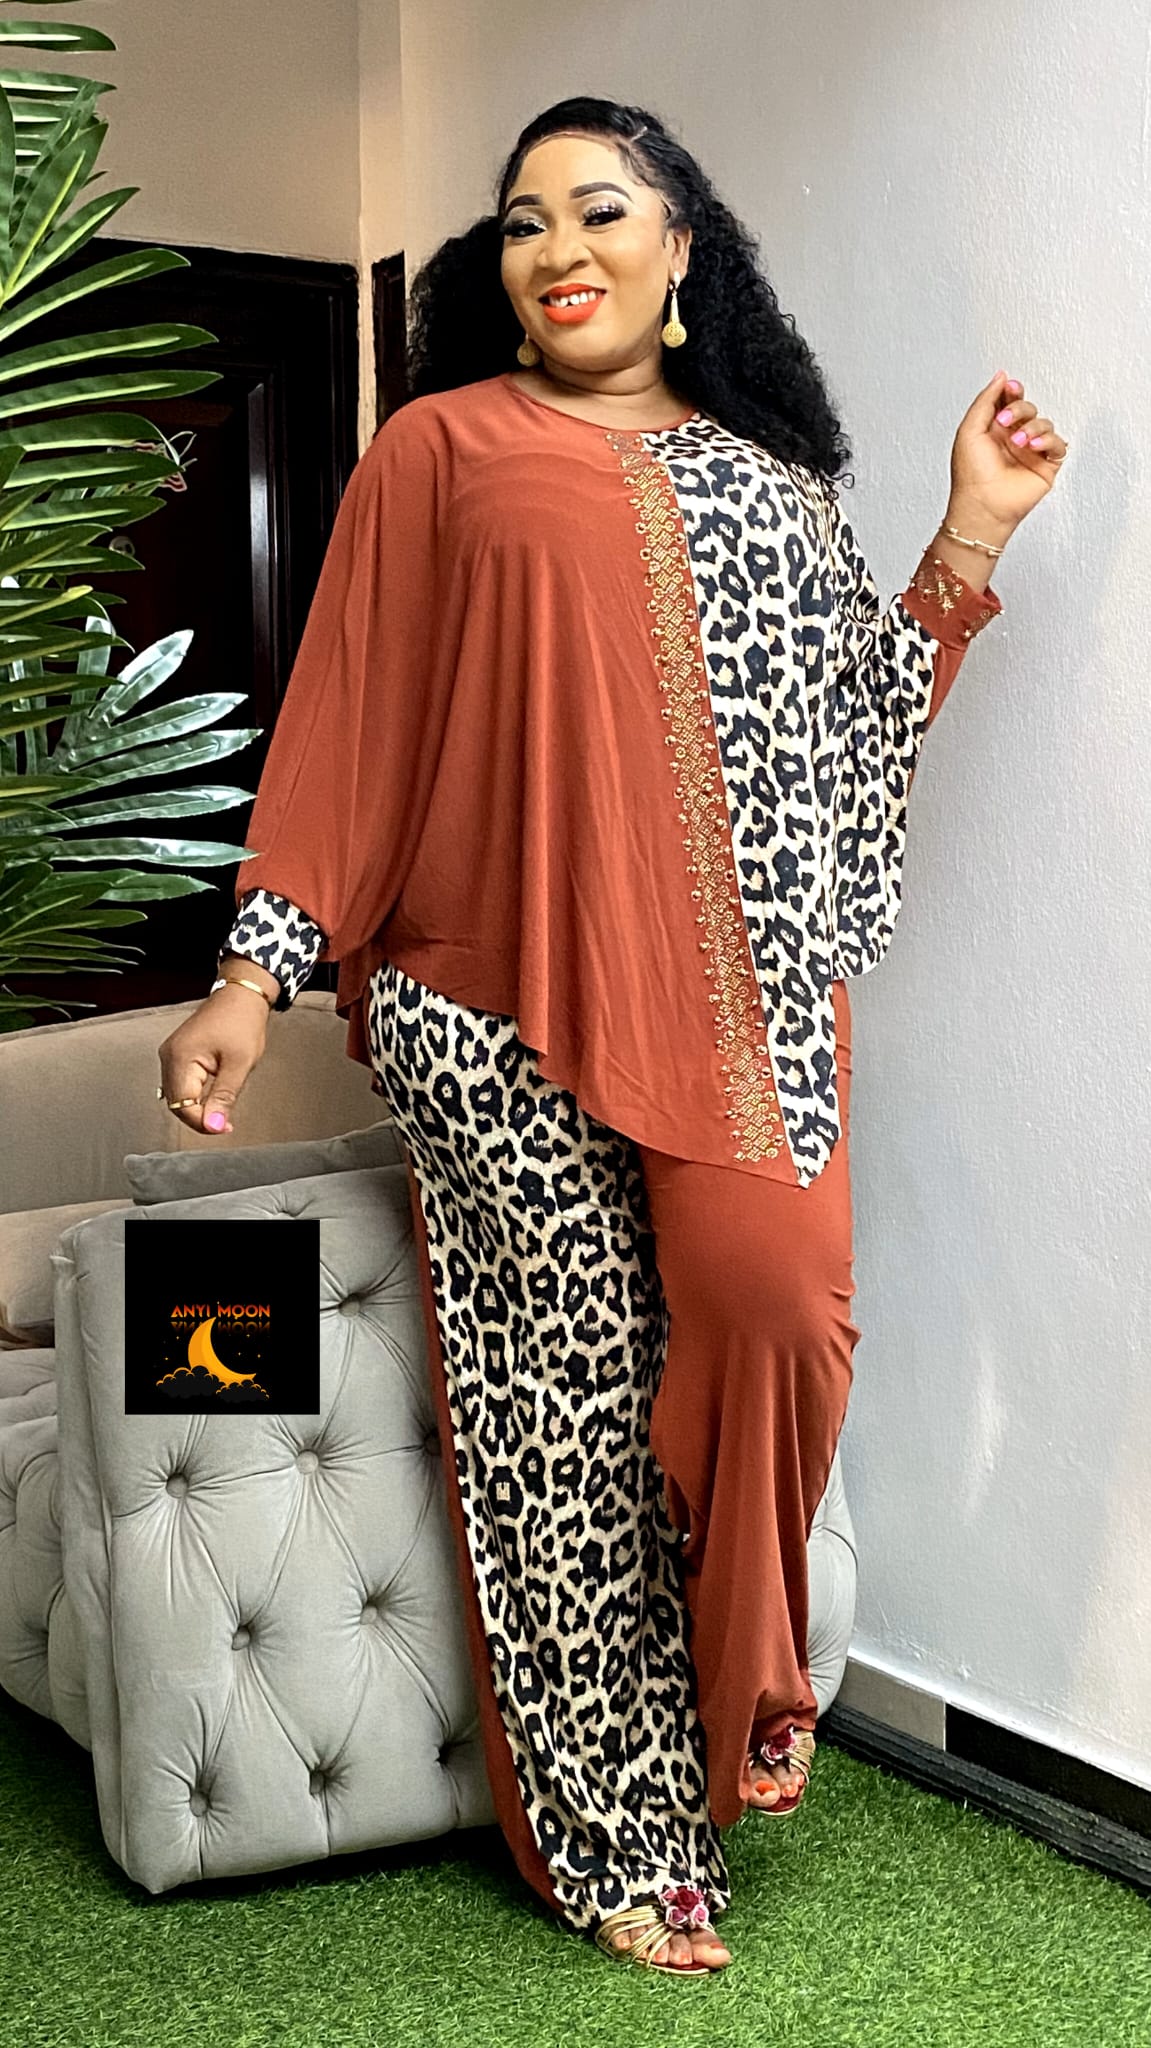 Brown Big Top and Pants Set - Perfect for Effortless Fashion"